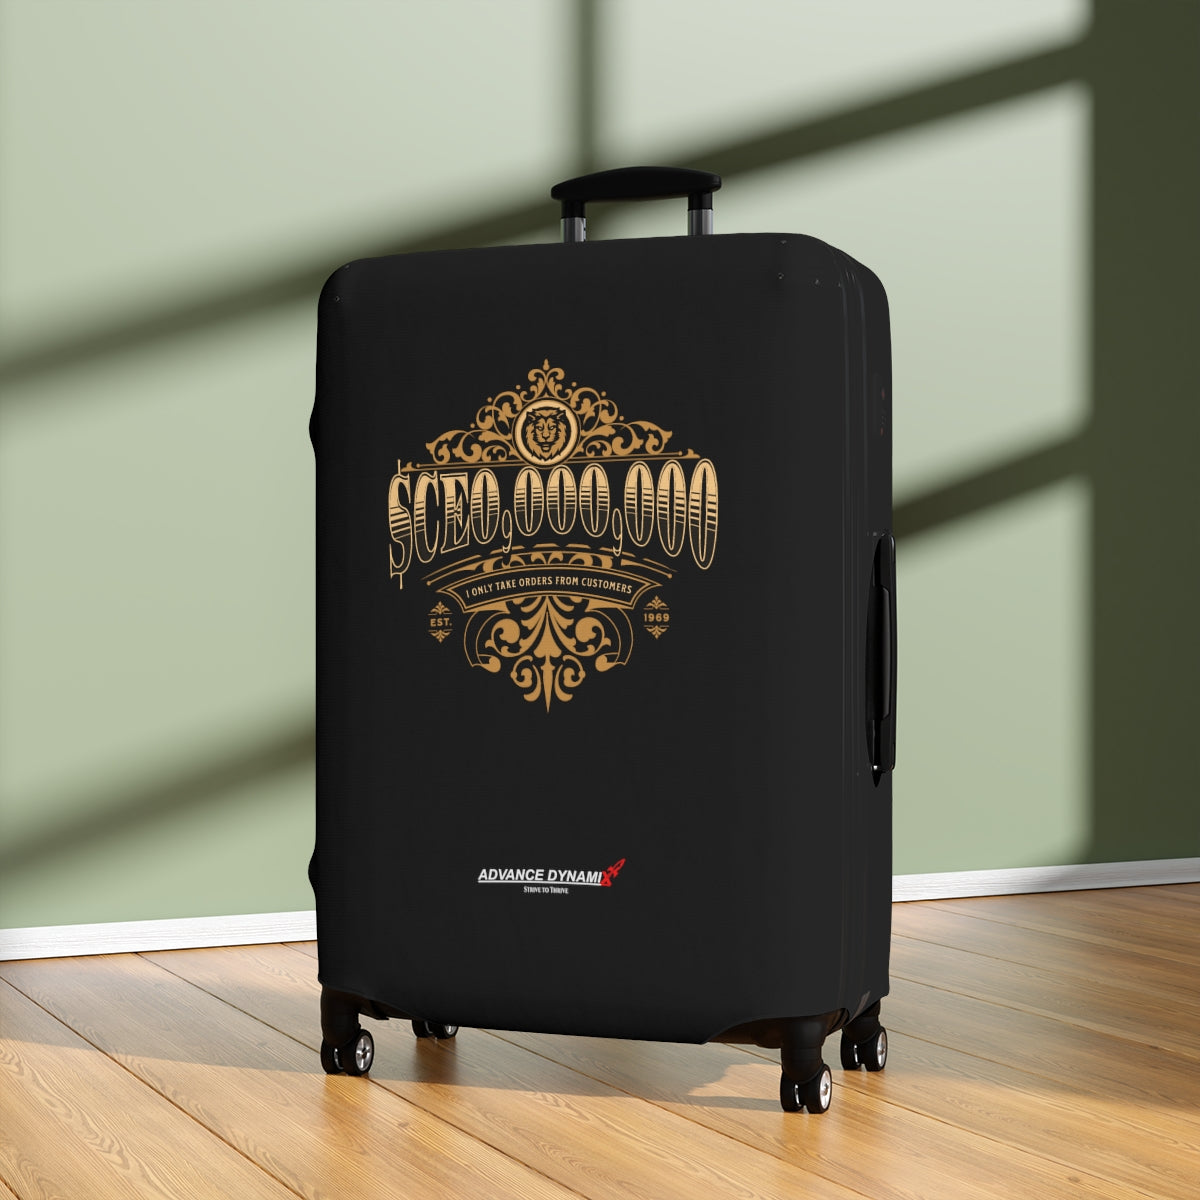 $CEO,000,000 - I only take orders from customers - Luggage Covers Infused with Advance Dynamix Add-A-Tude - Tell the world!